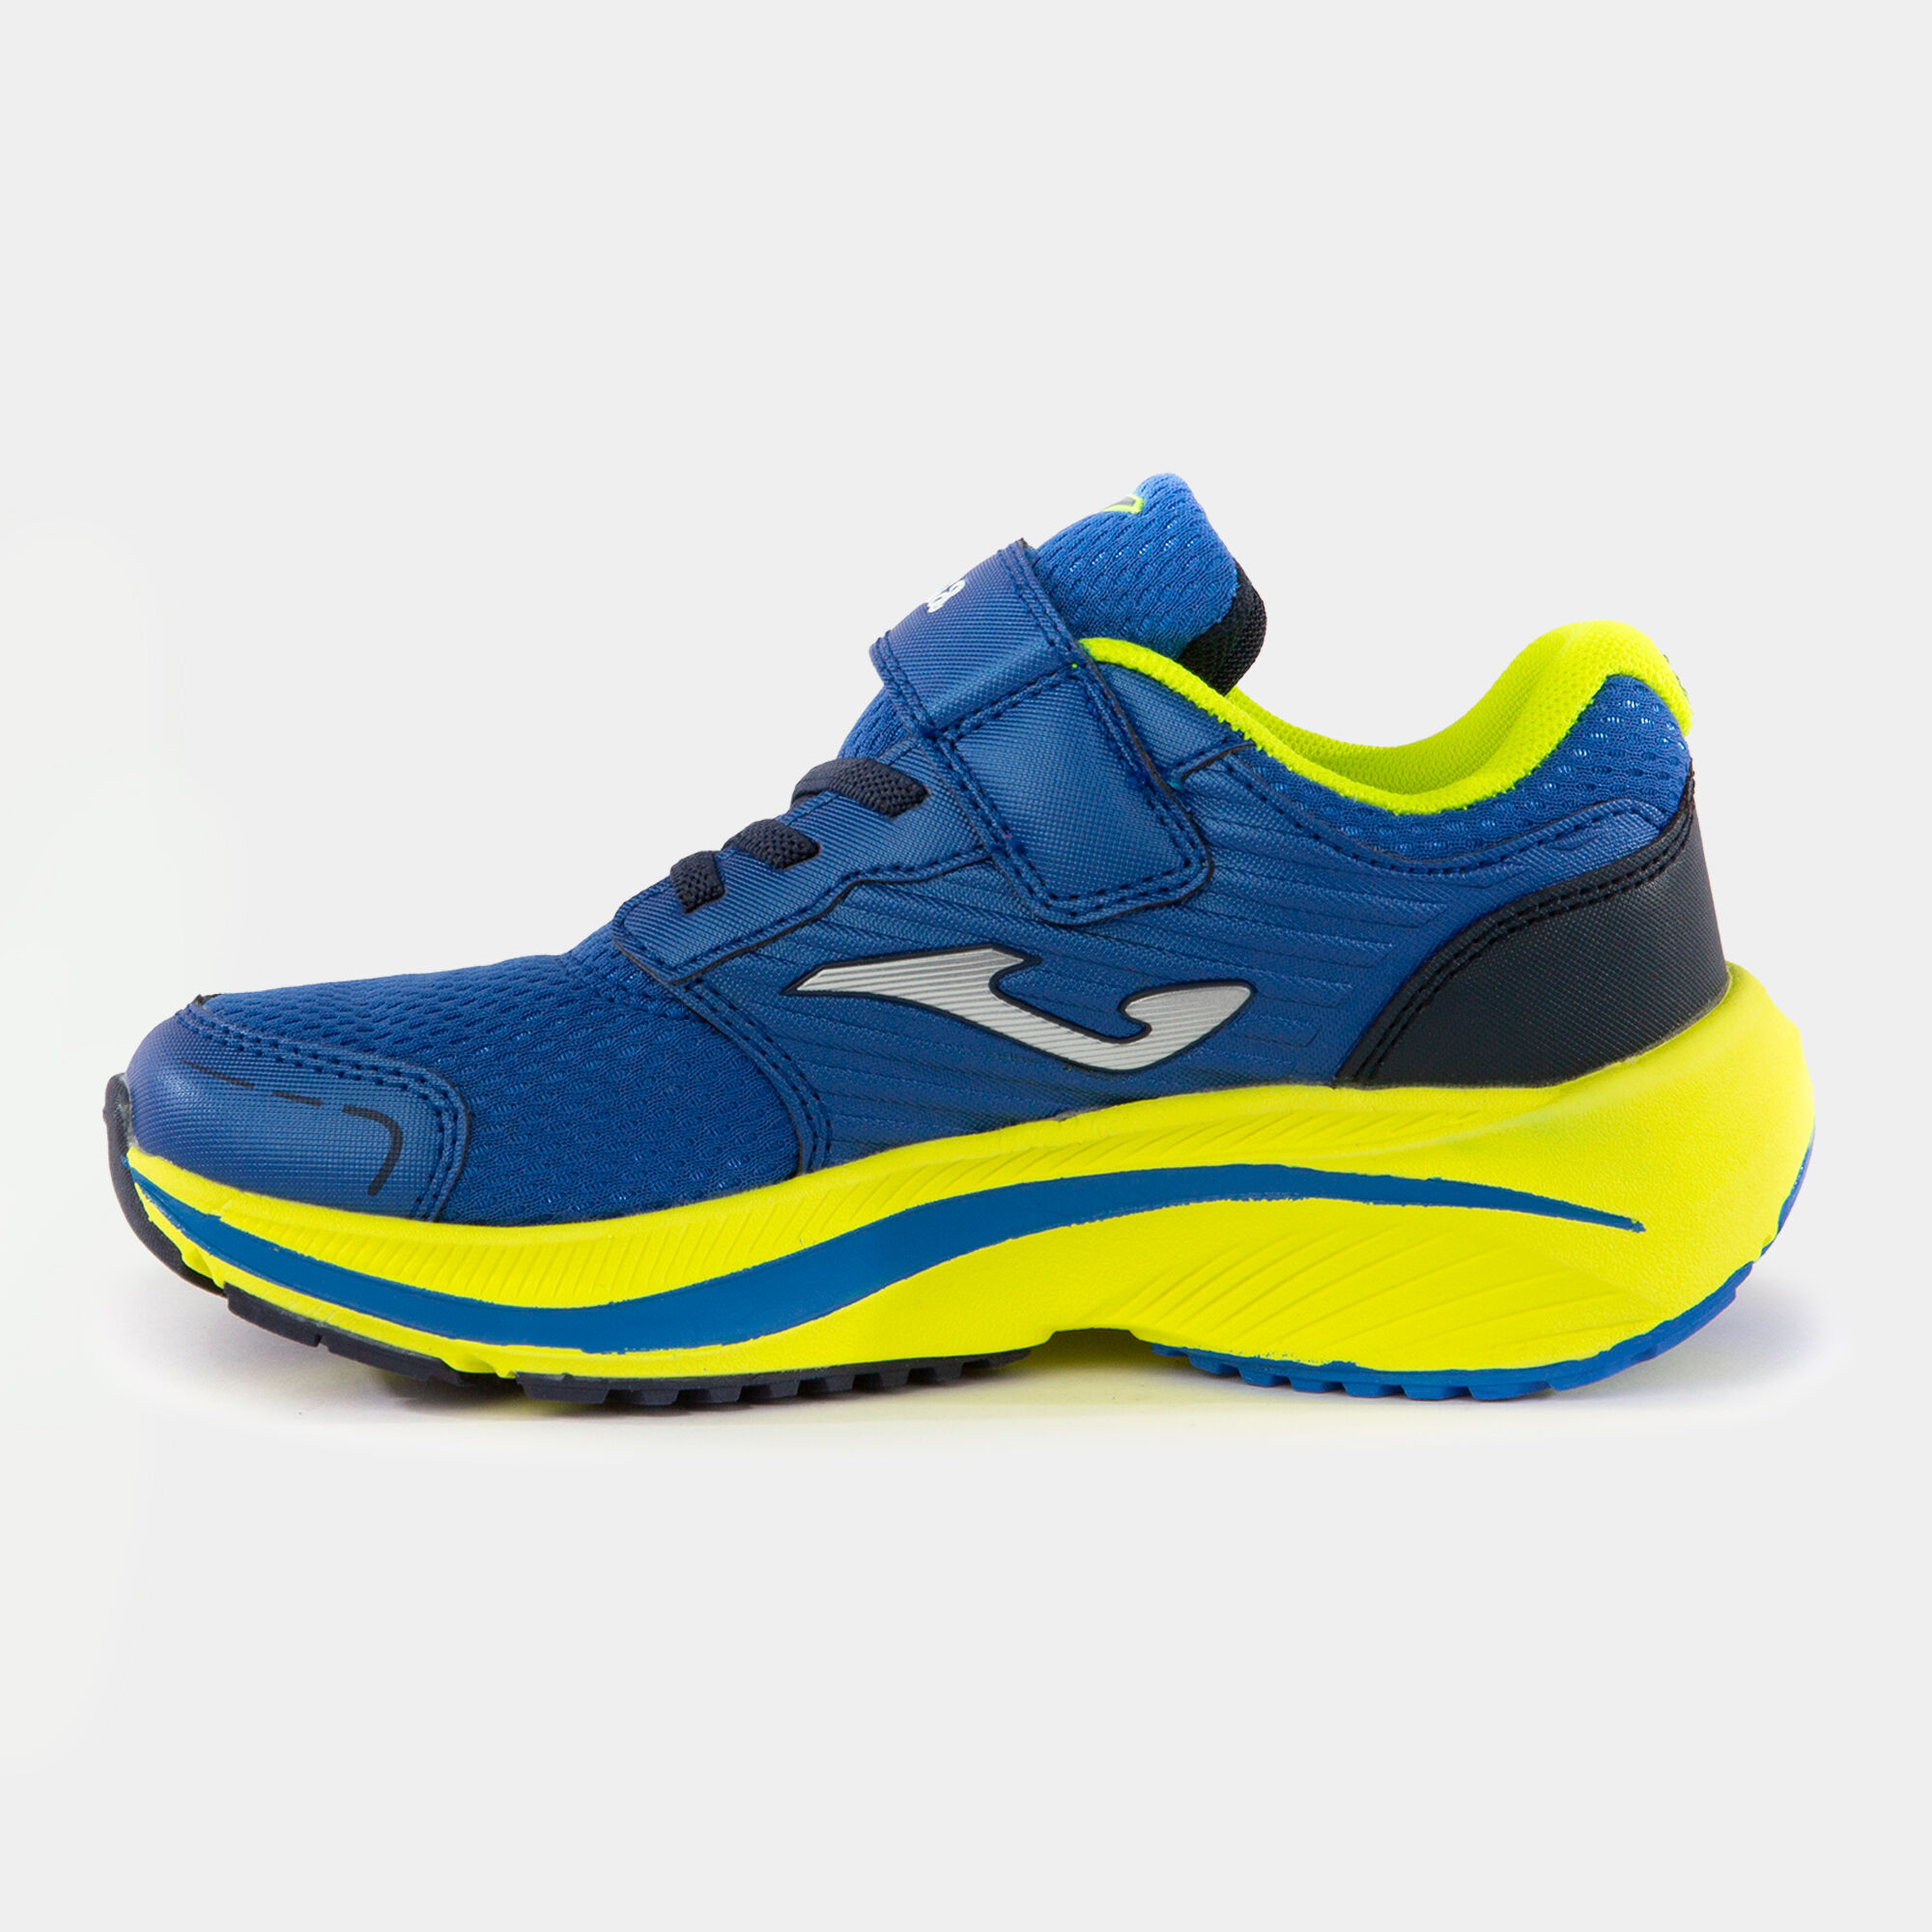 CASUAL SHOES FURY 22 JUNIOR ROYAL BLUE FLUORESCENT GREEN